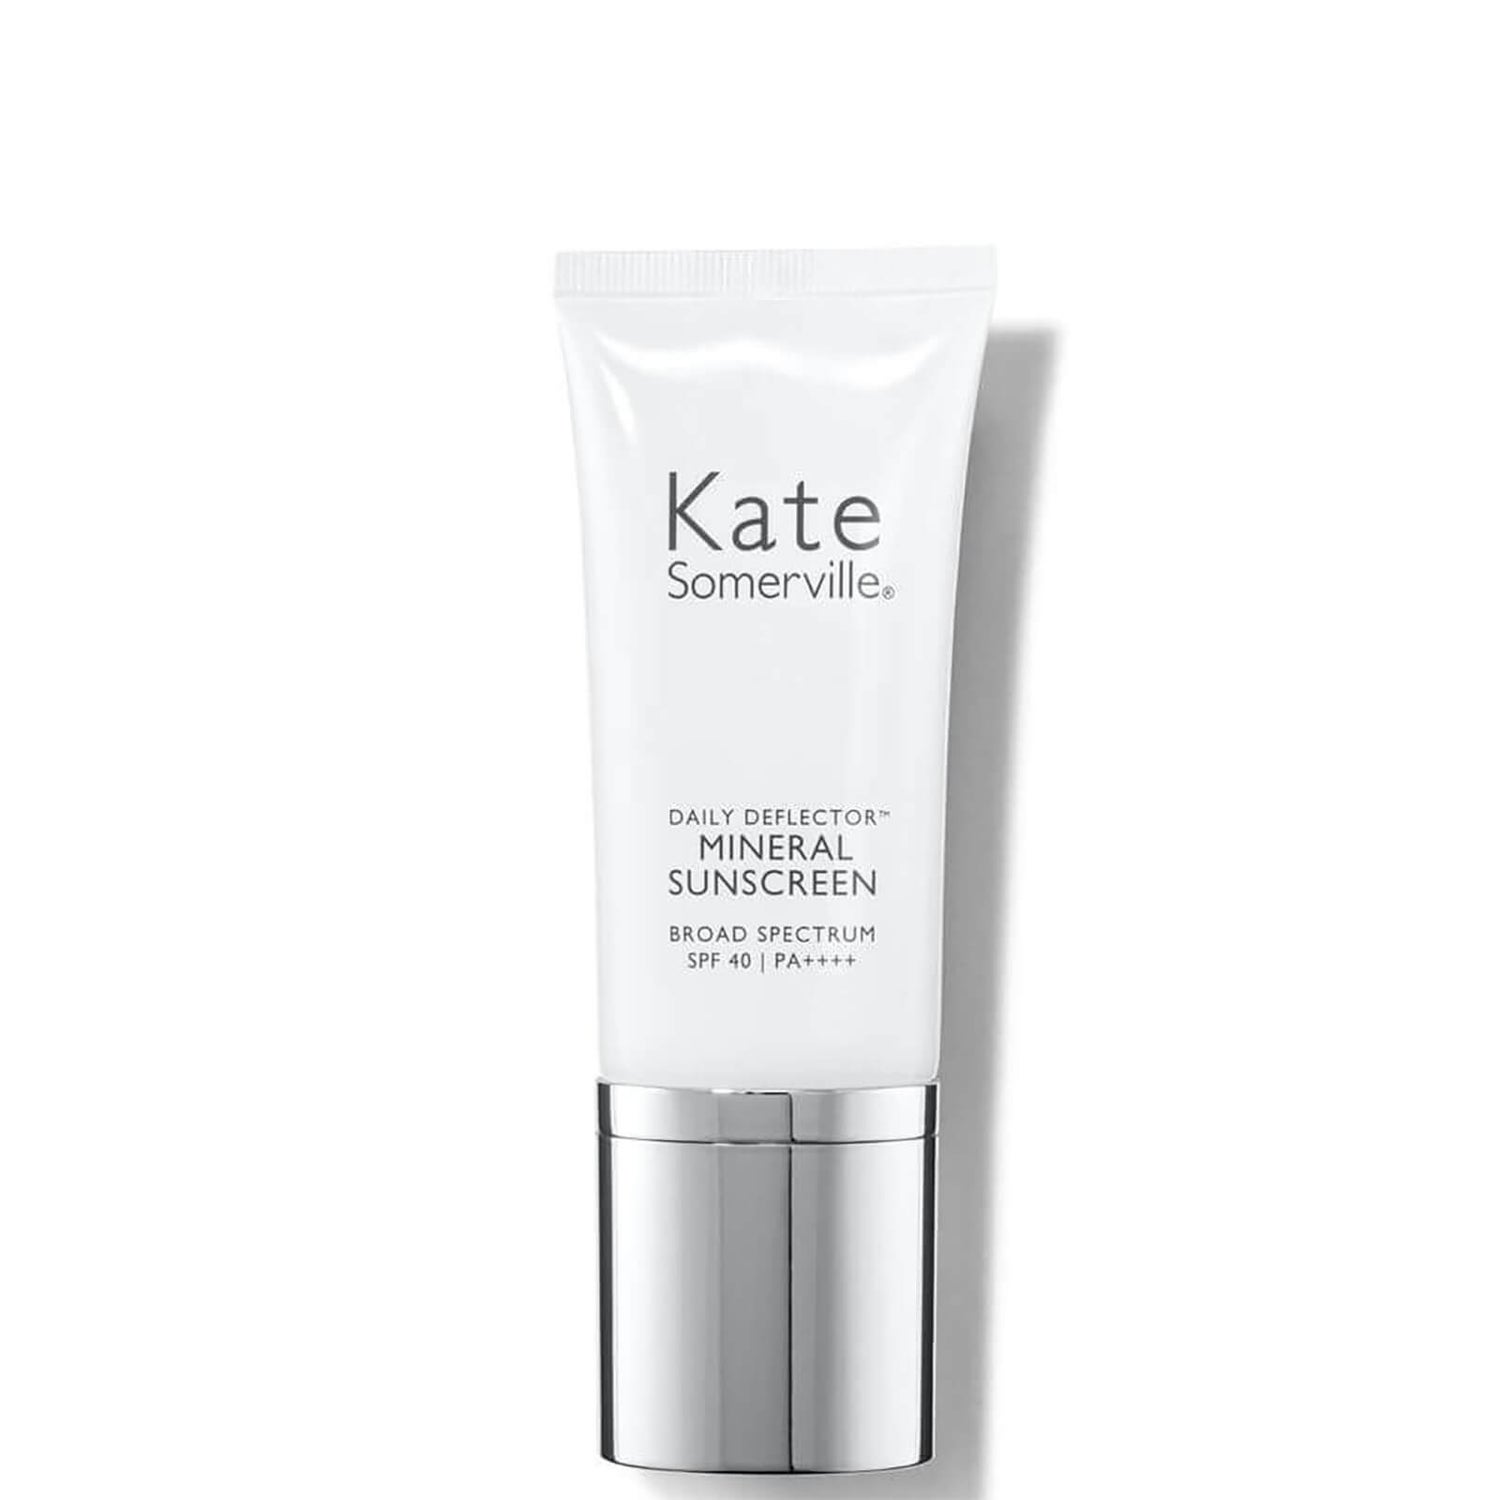 Kate Somerville Daily Deflector Mineral Sunscreen SPF 40 | PA 1.7 fl. oz.